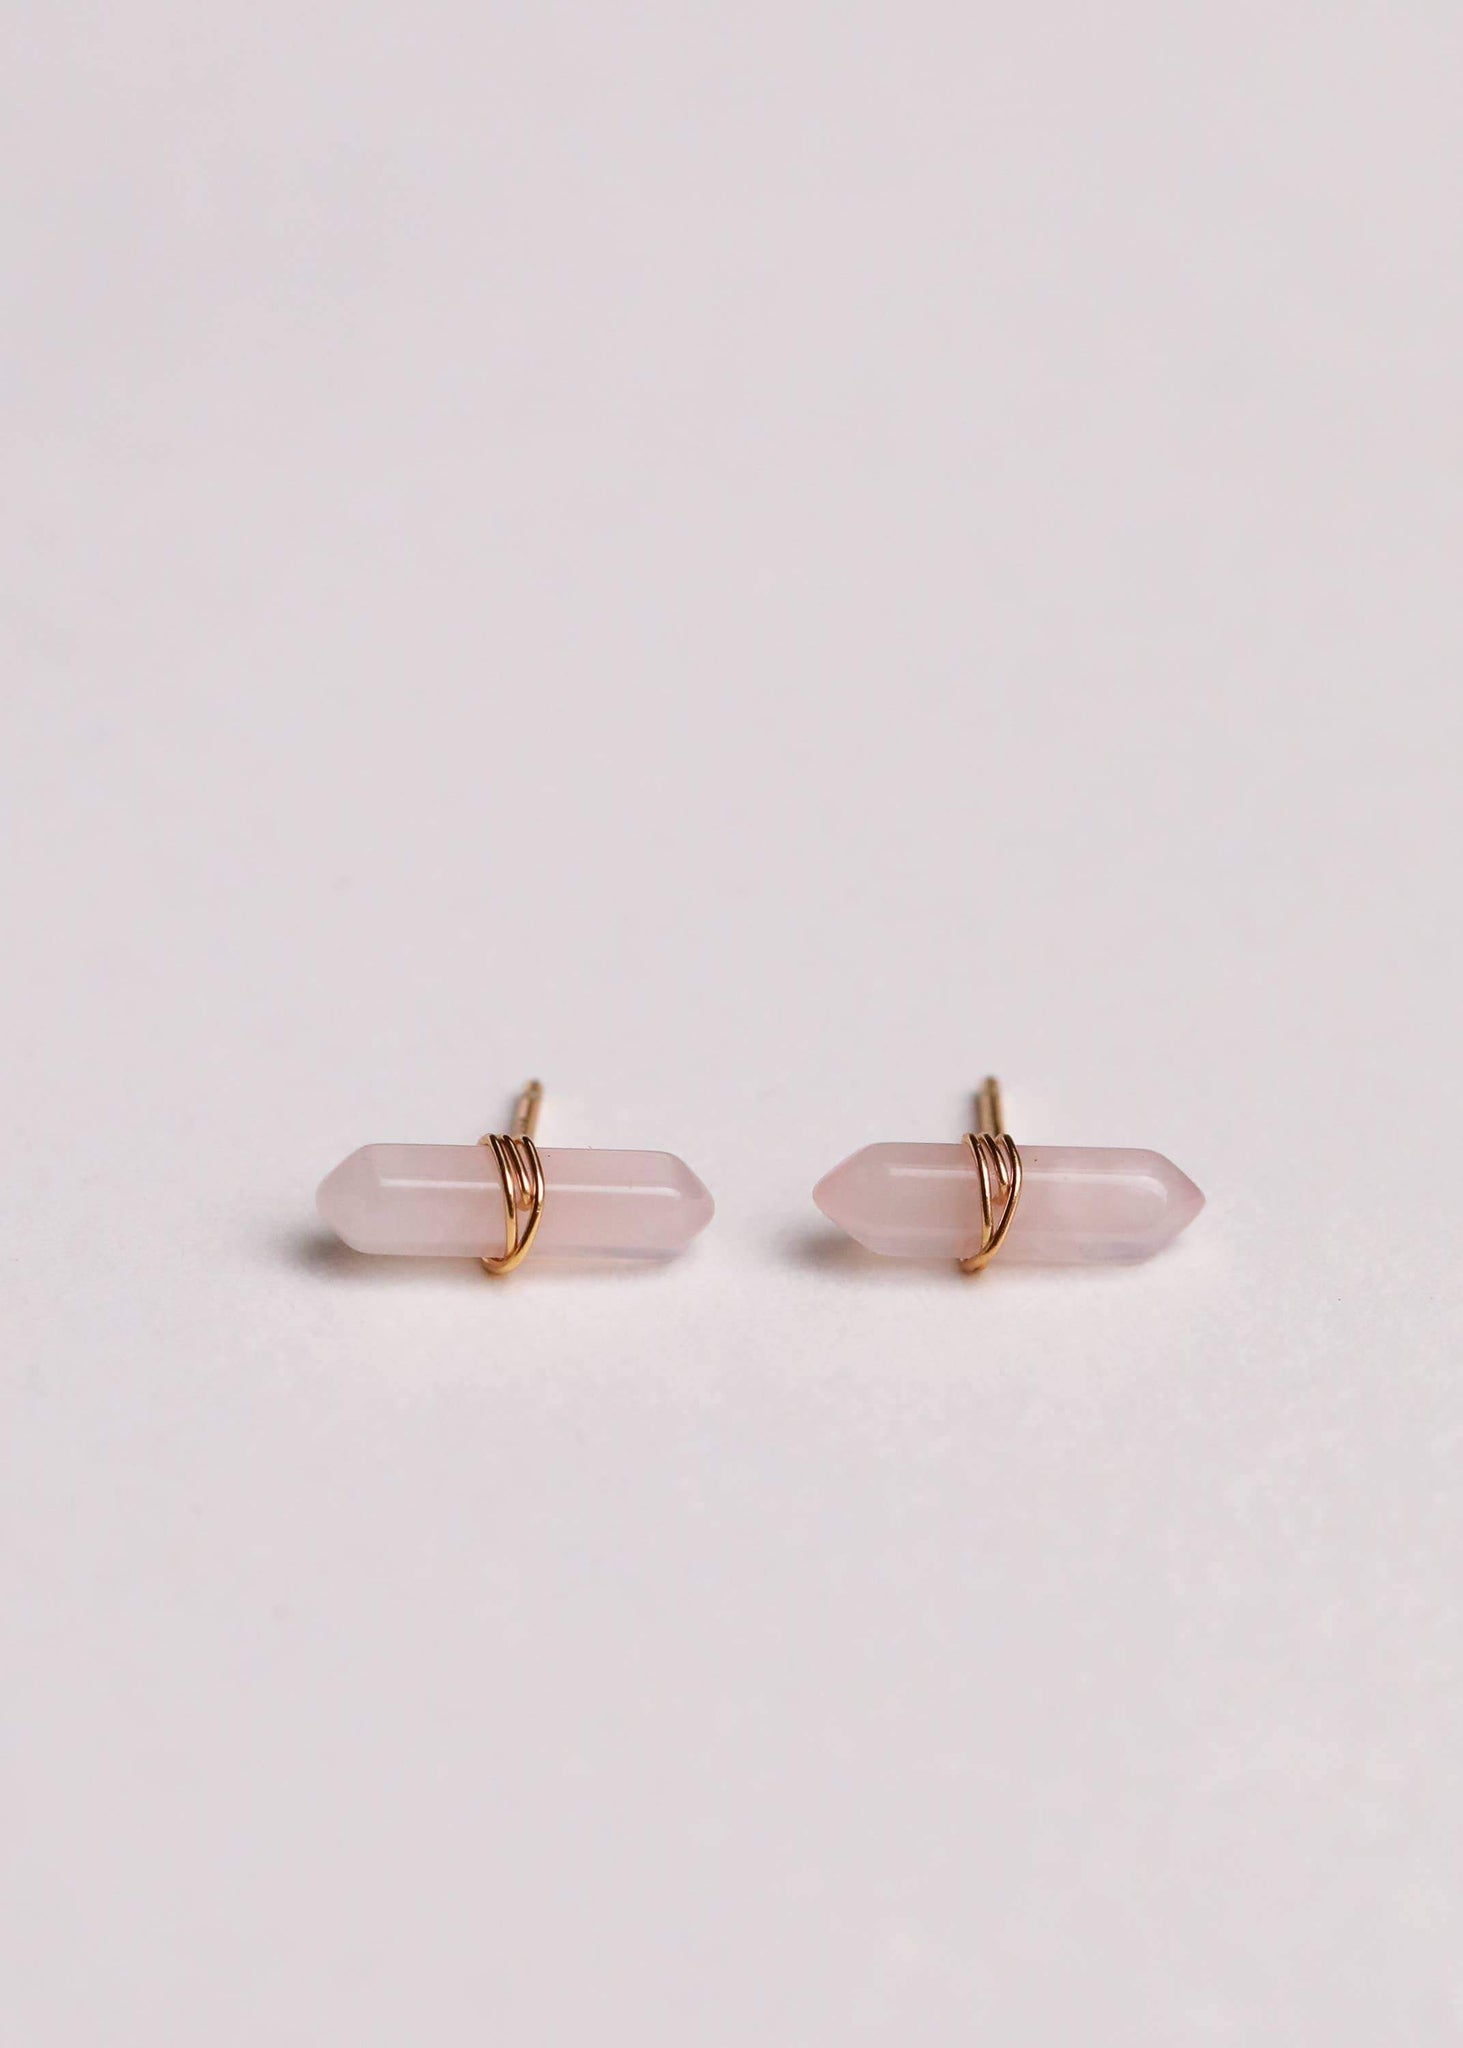 Rose Quartz Mineral Point - Rise and Redemption